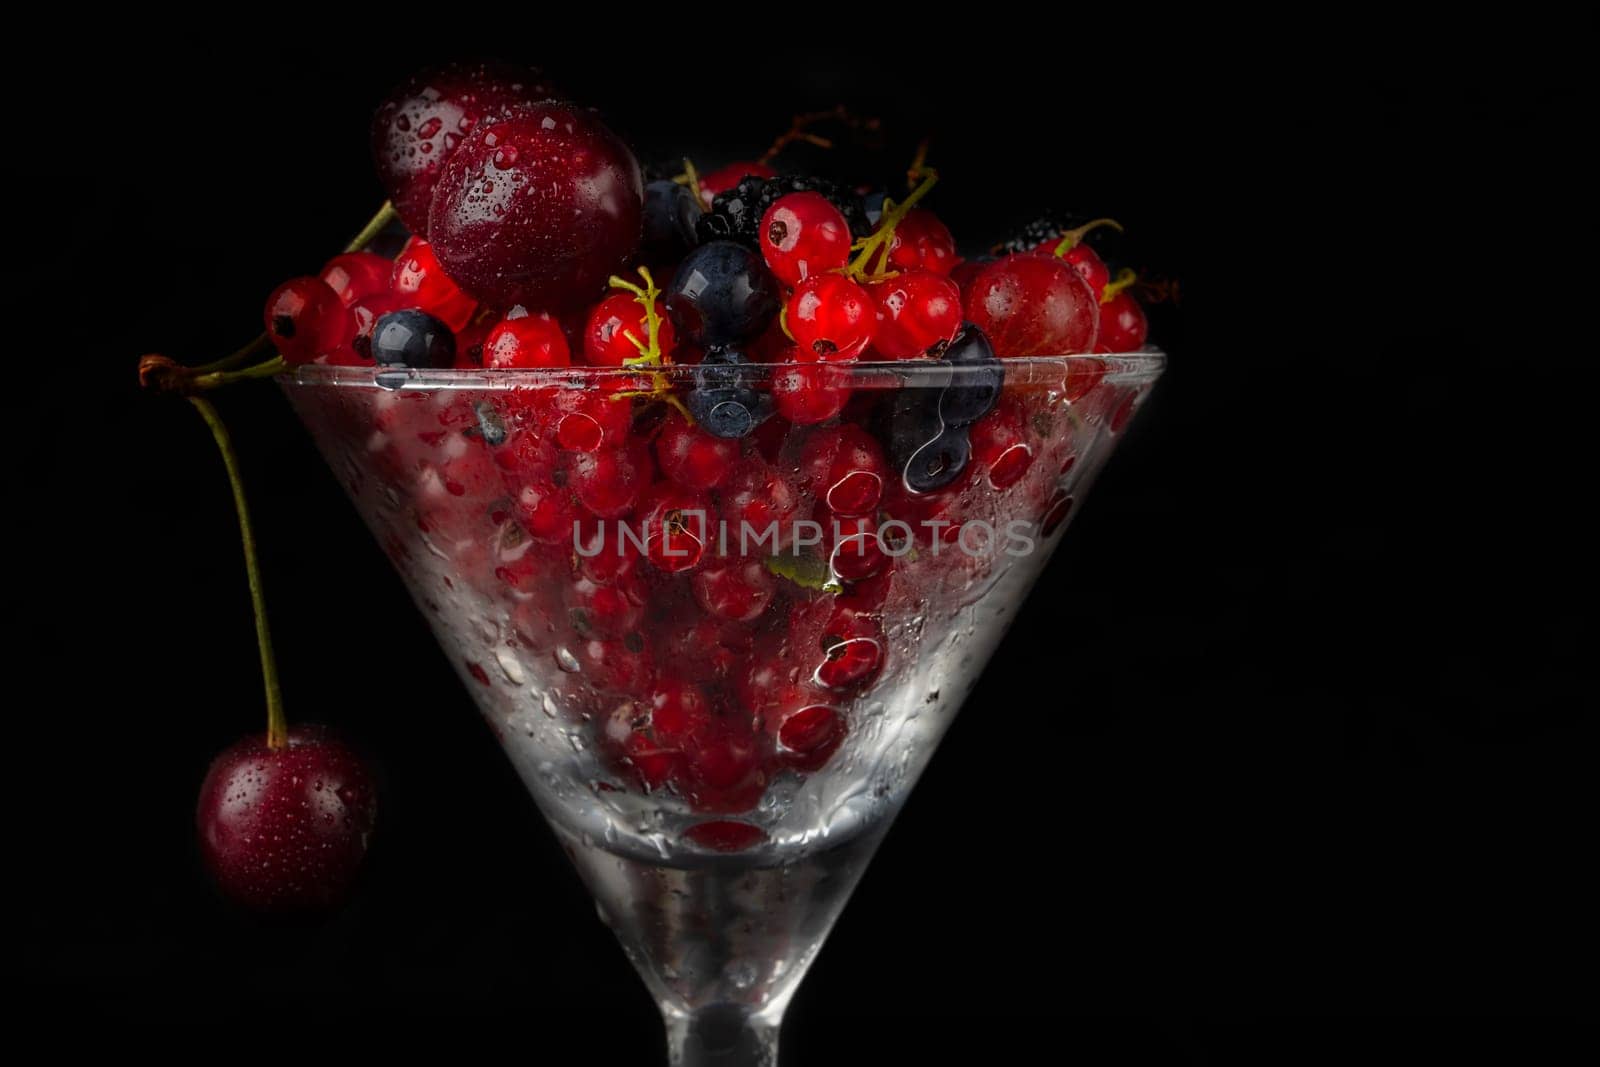 Summer berries in a glass glass on a dark background close-up.